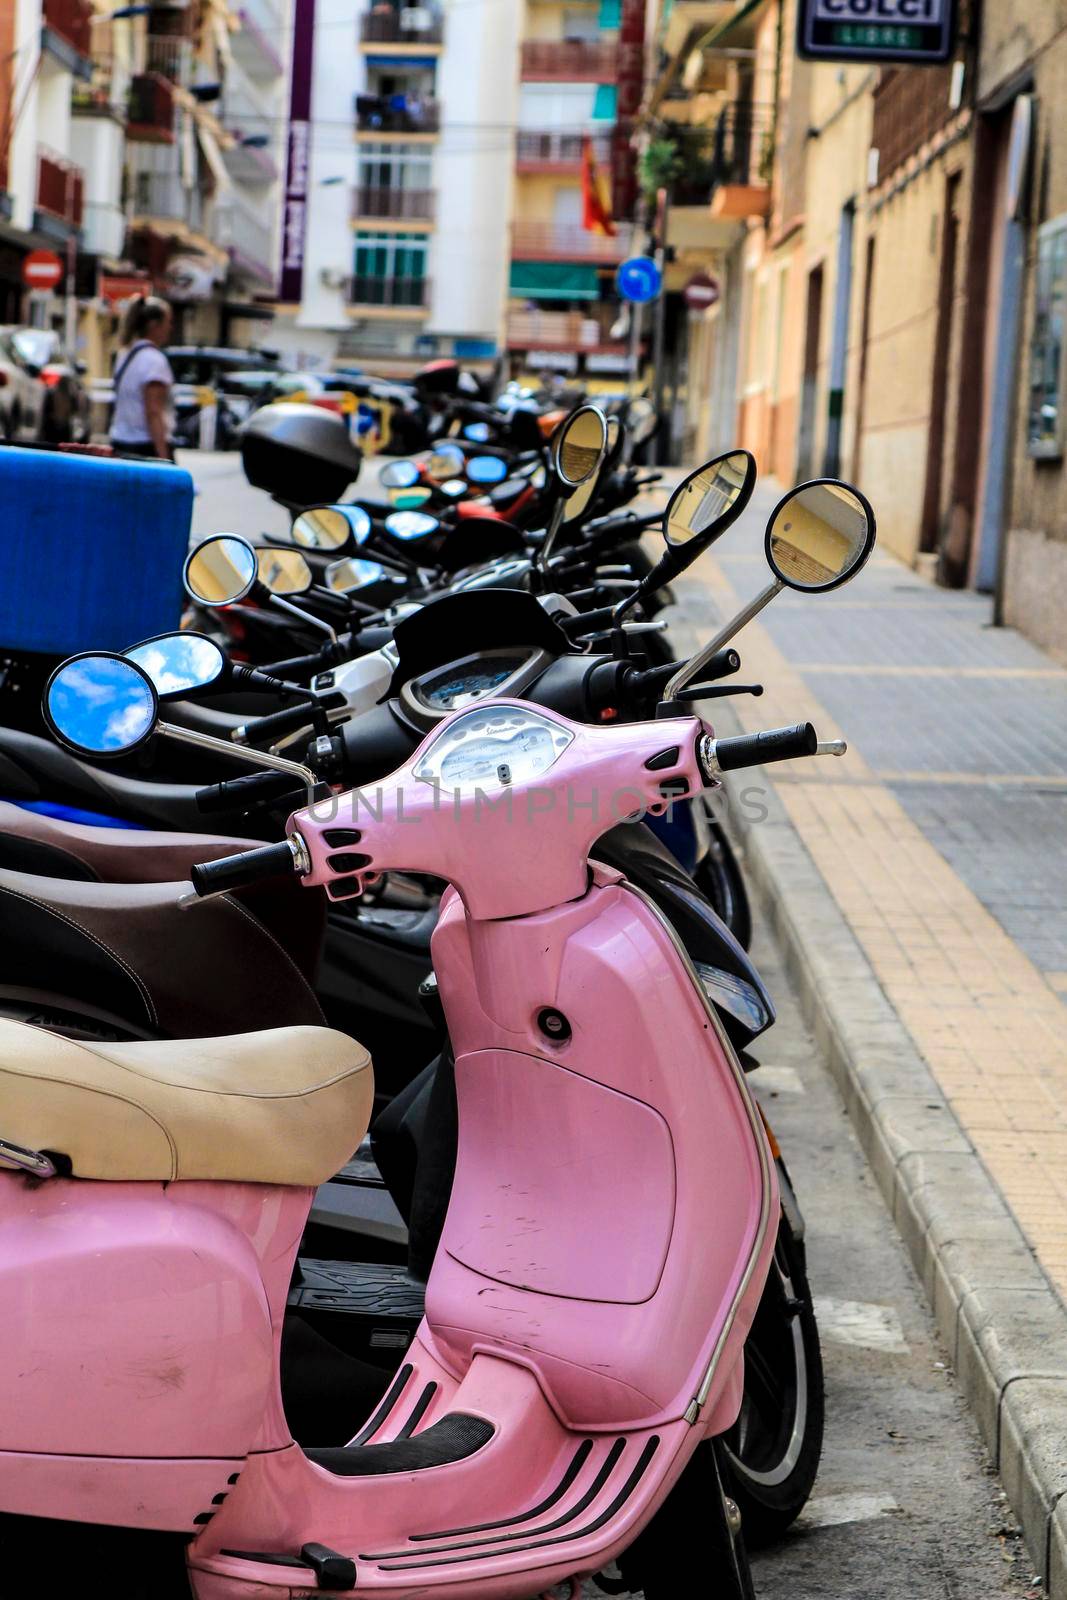 Alicante, Spain- October 9, 2021: Row of motorcycles parked in a row on the street in Spain